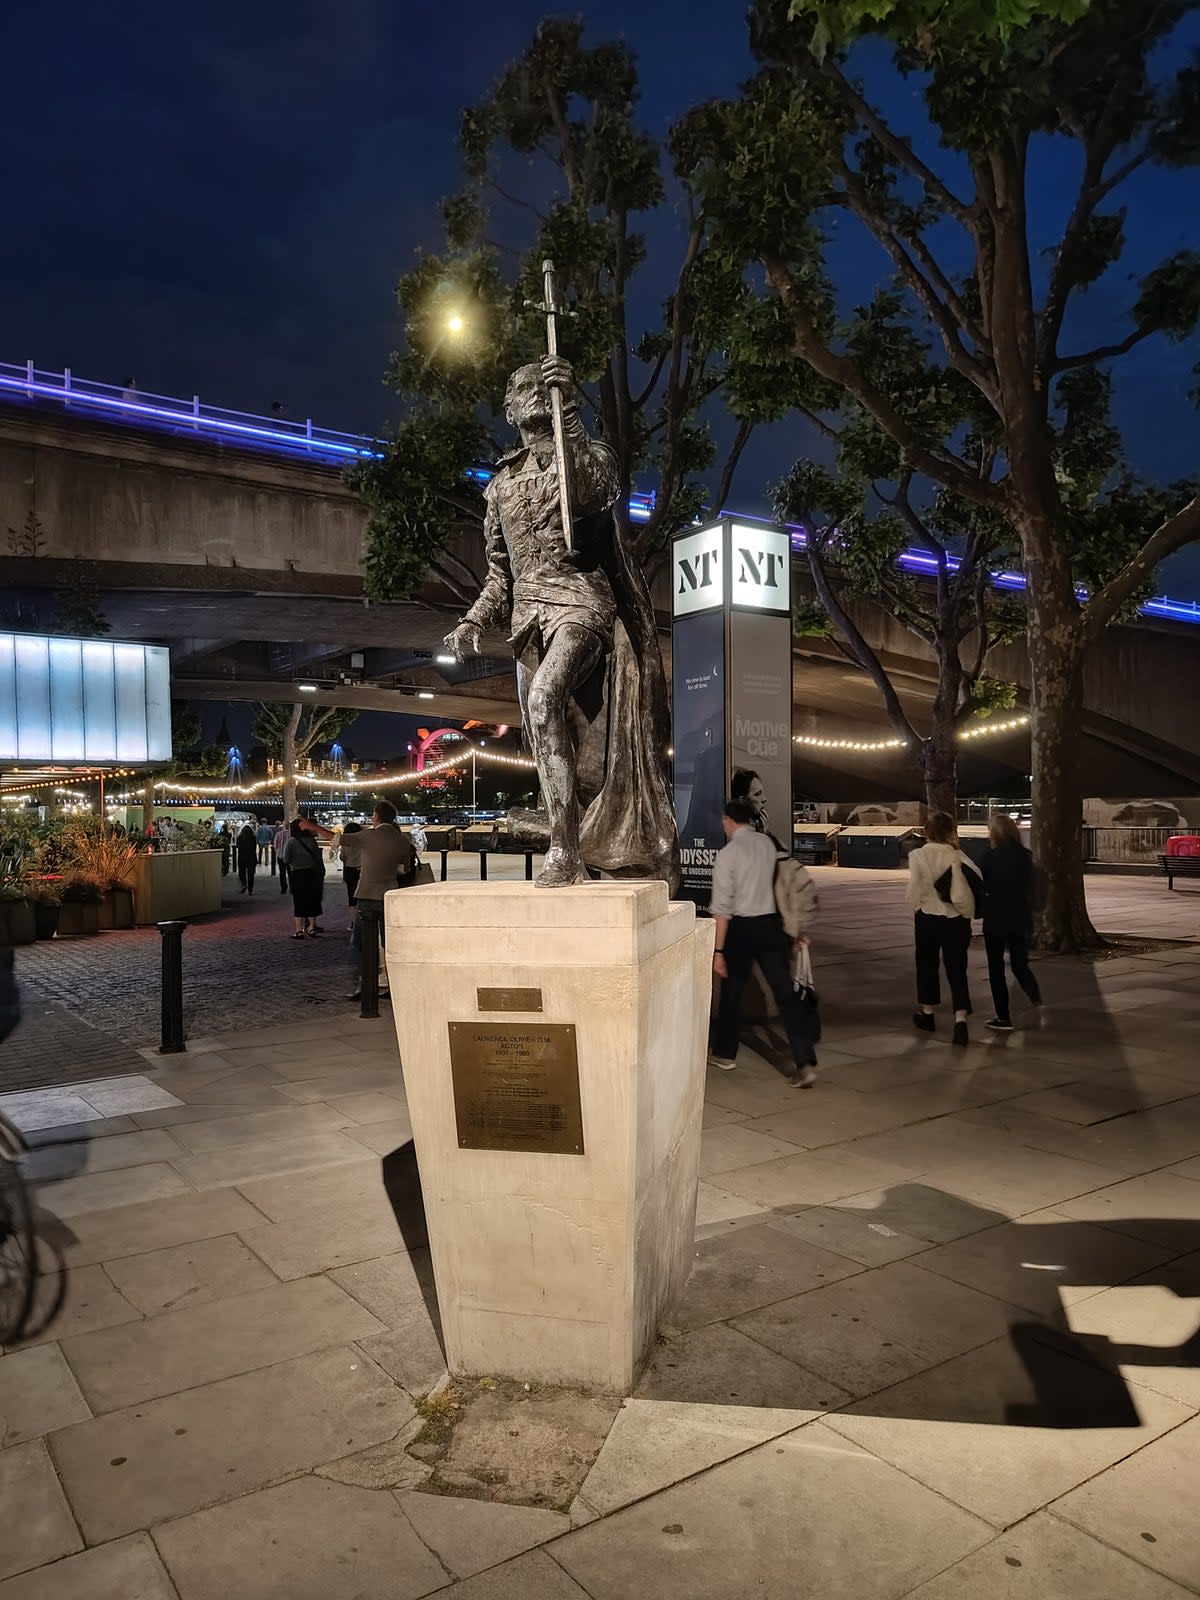 The statue of Laurence Olivier, the National Theatre's first director, on the South Bank (David Phelan)